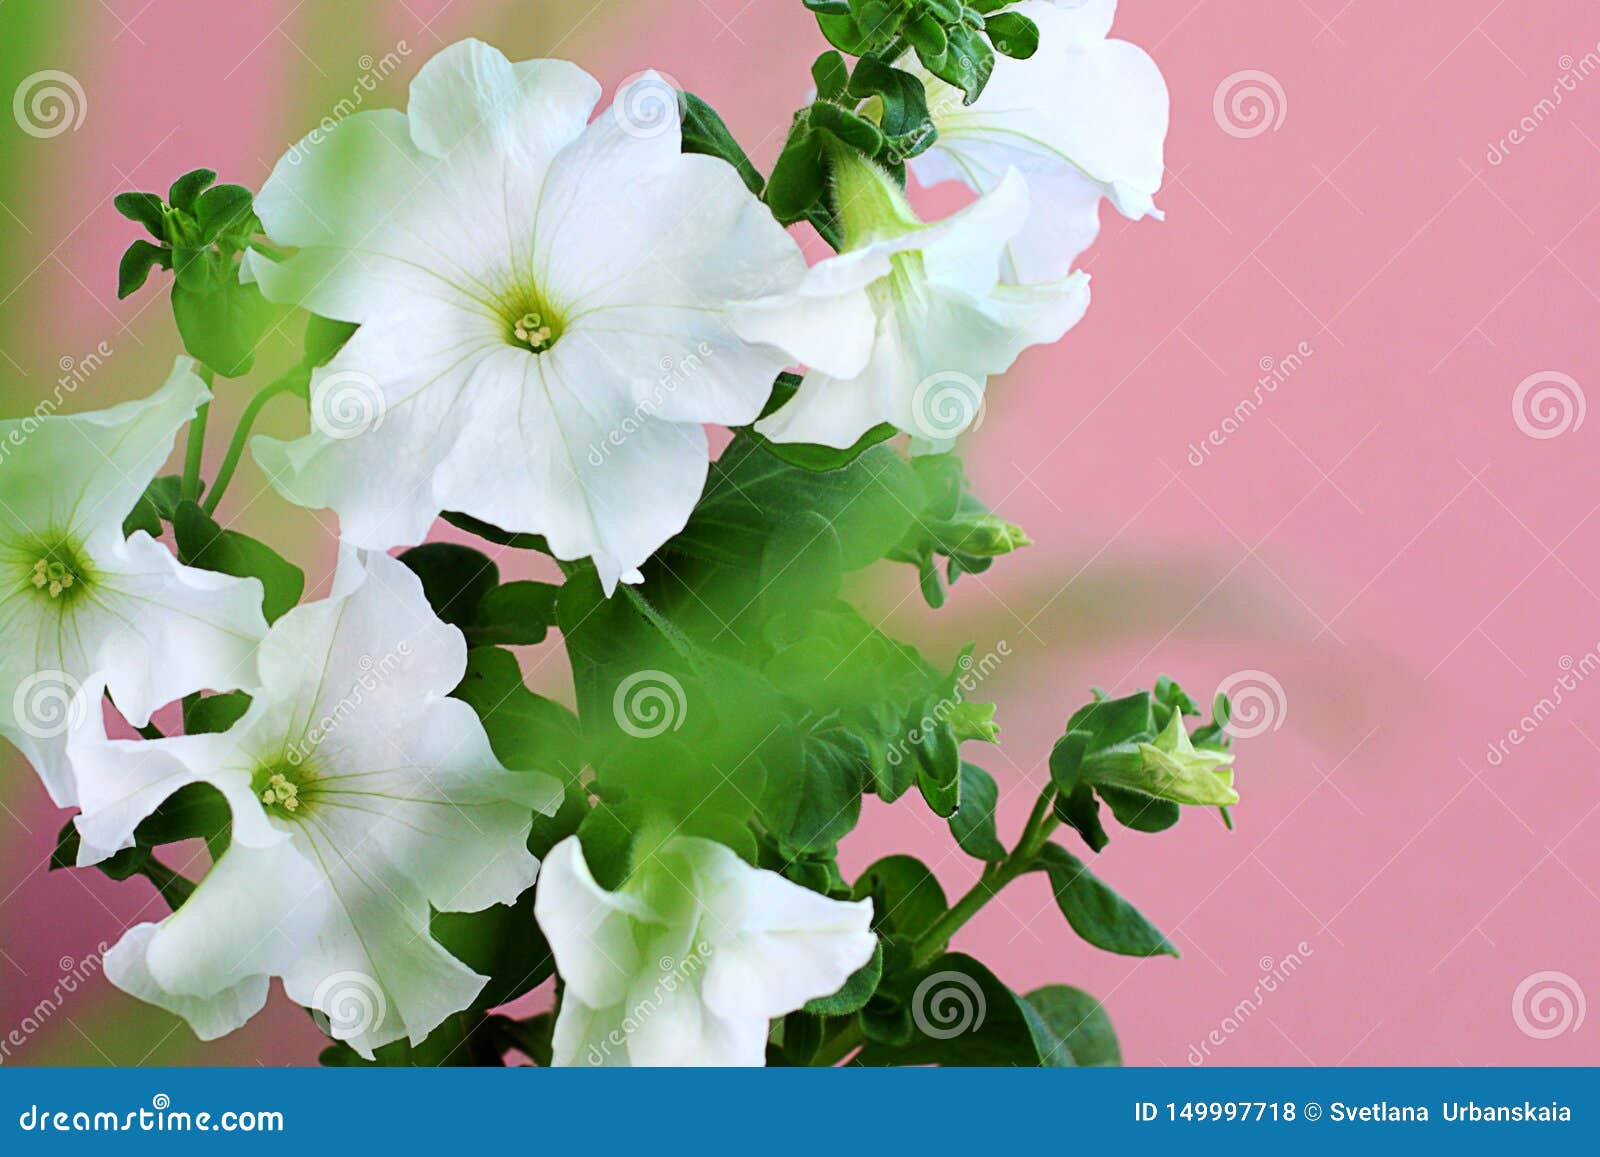 Petunia Axillaris Flowers Are Also Known As Large White Petunia On A Pink Background Stock Photo Image Of Bright Flower 149997718